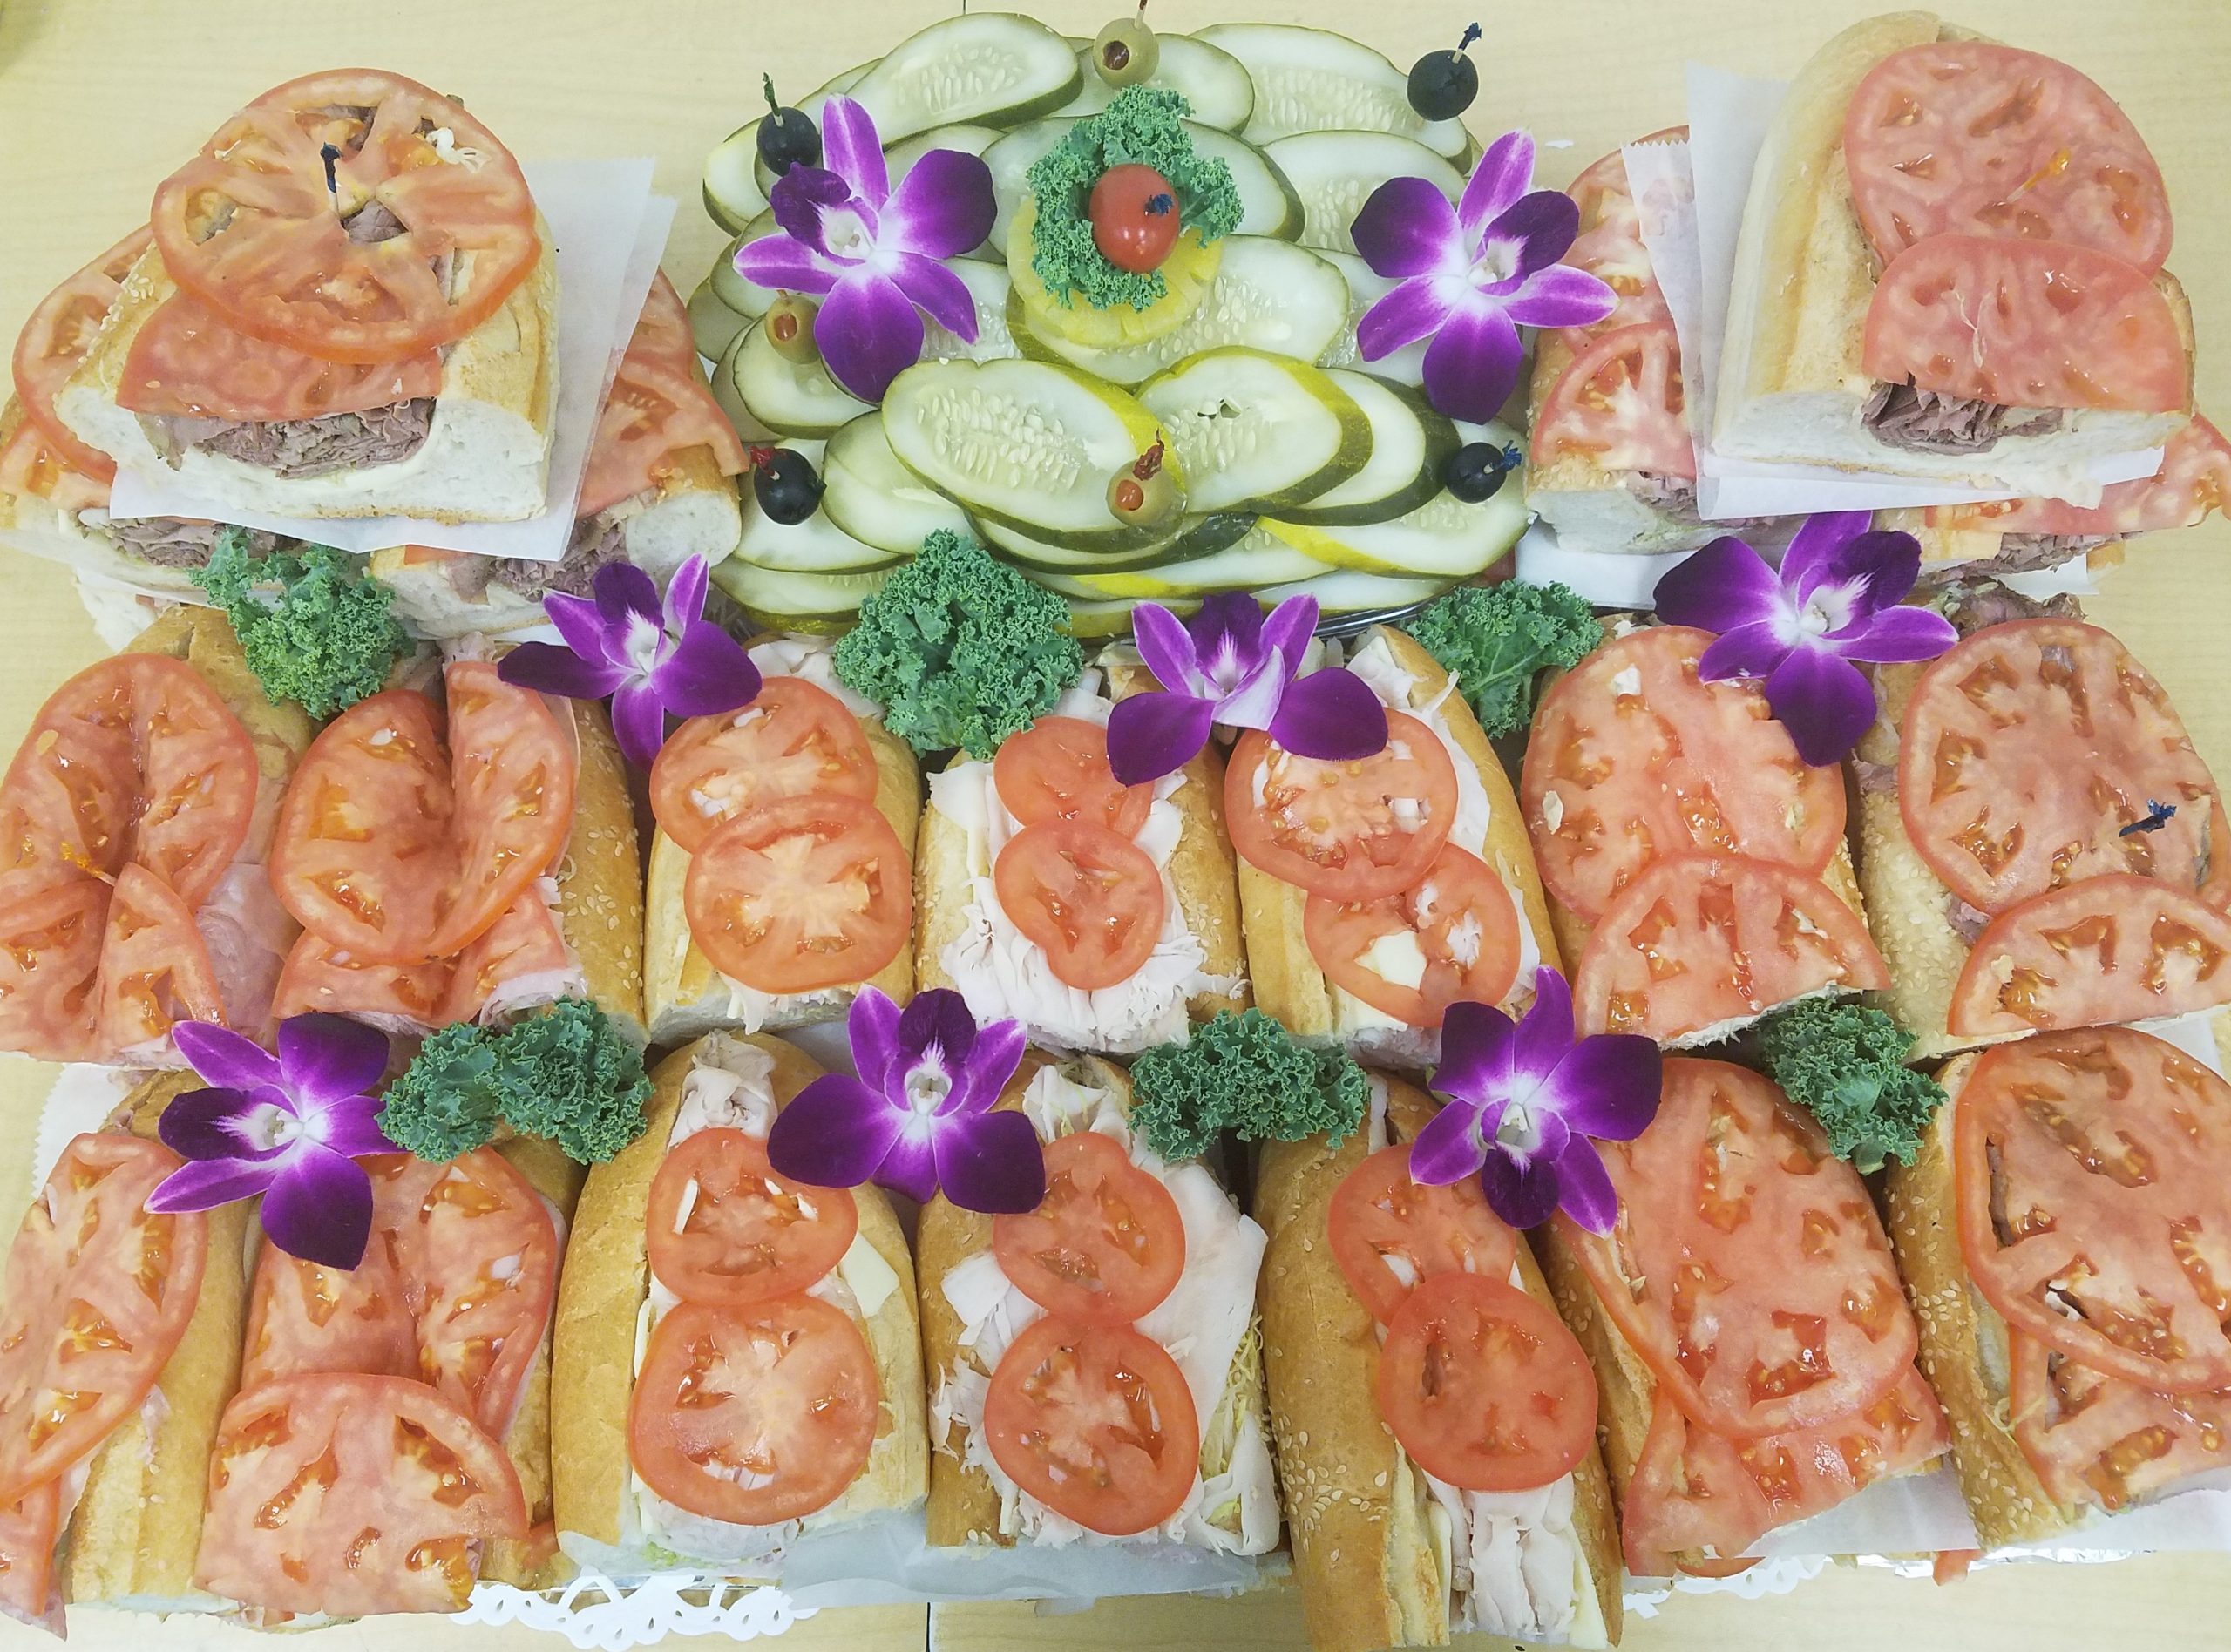 A tray of sandwiches on a table.